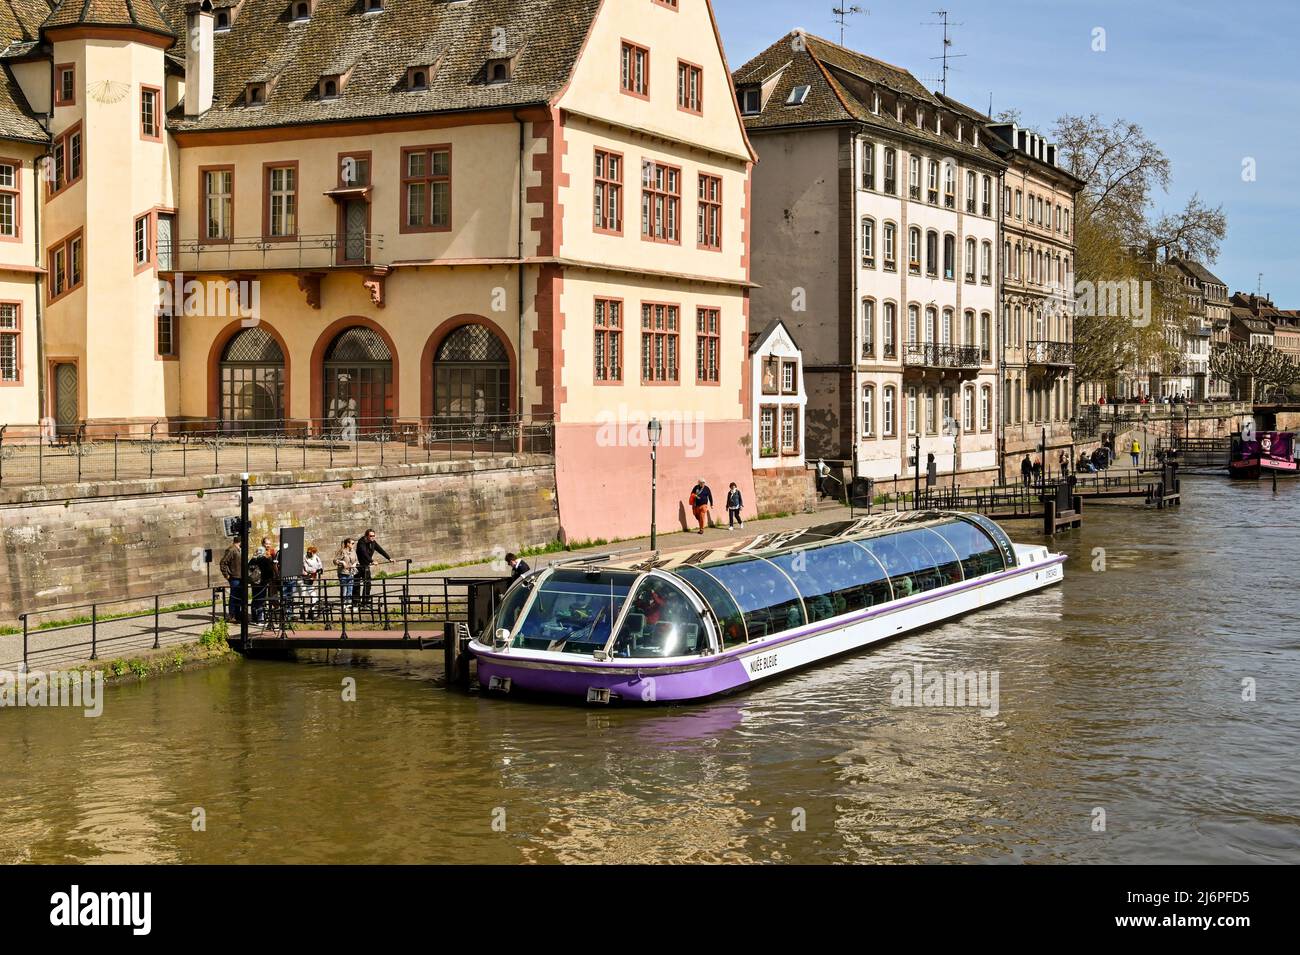 Strasbourg, France - April 2022: River cruise boat at a jetty picking up visitors for a trip on the River Ill which runs through the centre of the cit Stock Photo